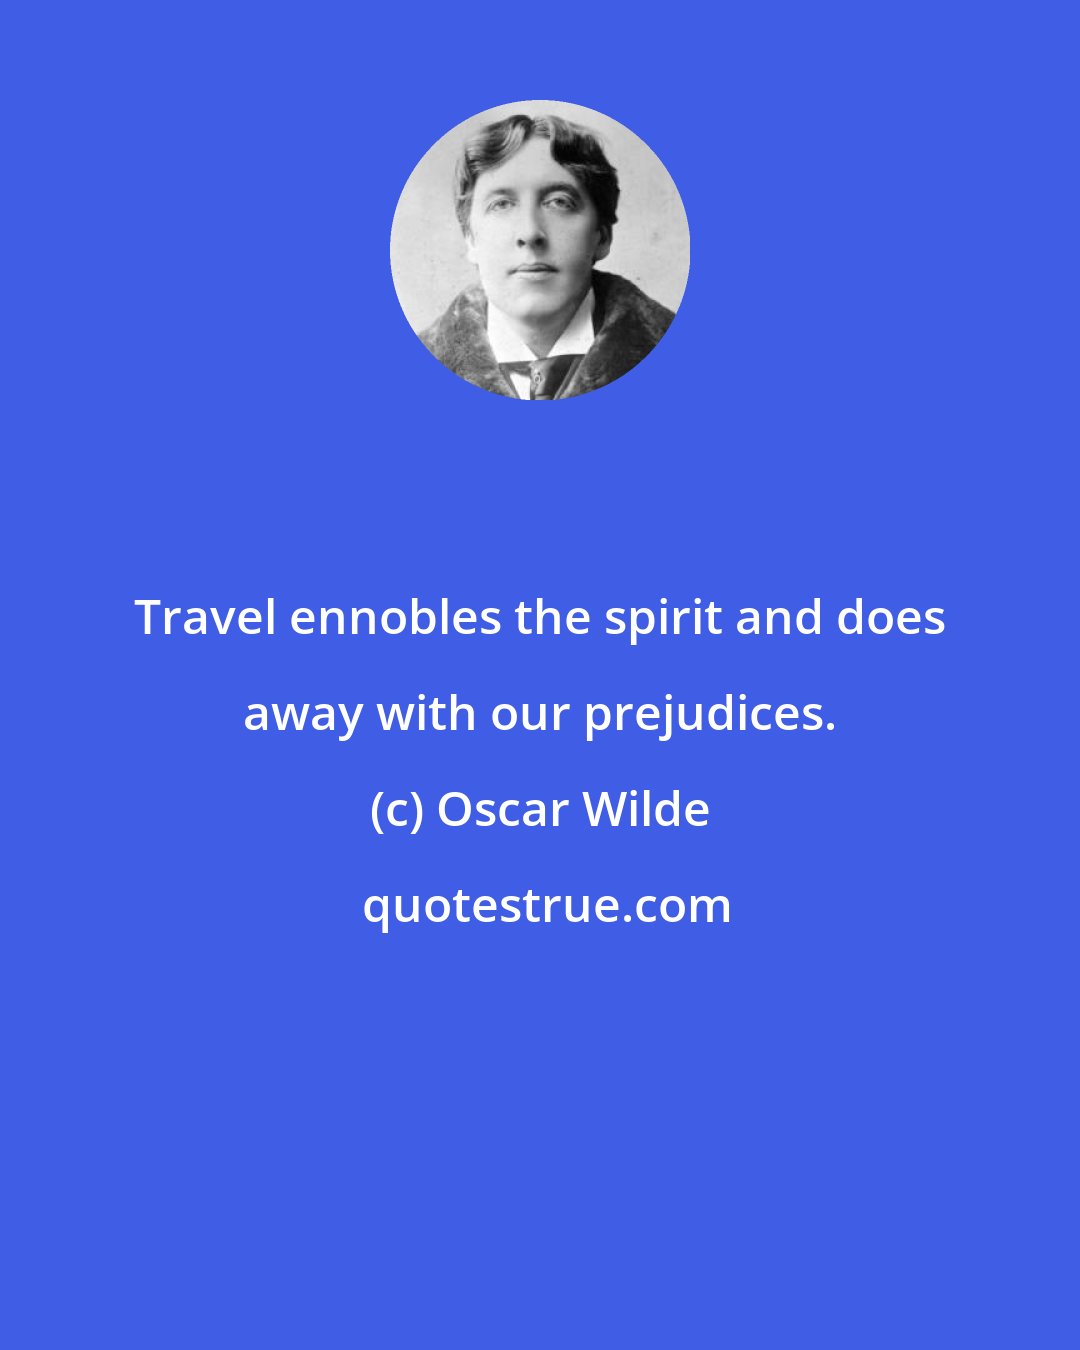 Oscar Wilde: Travel ennobles the spirit and does away with our prejudices.